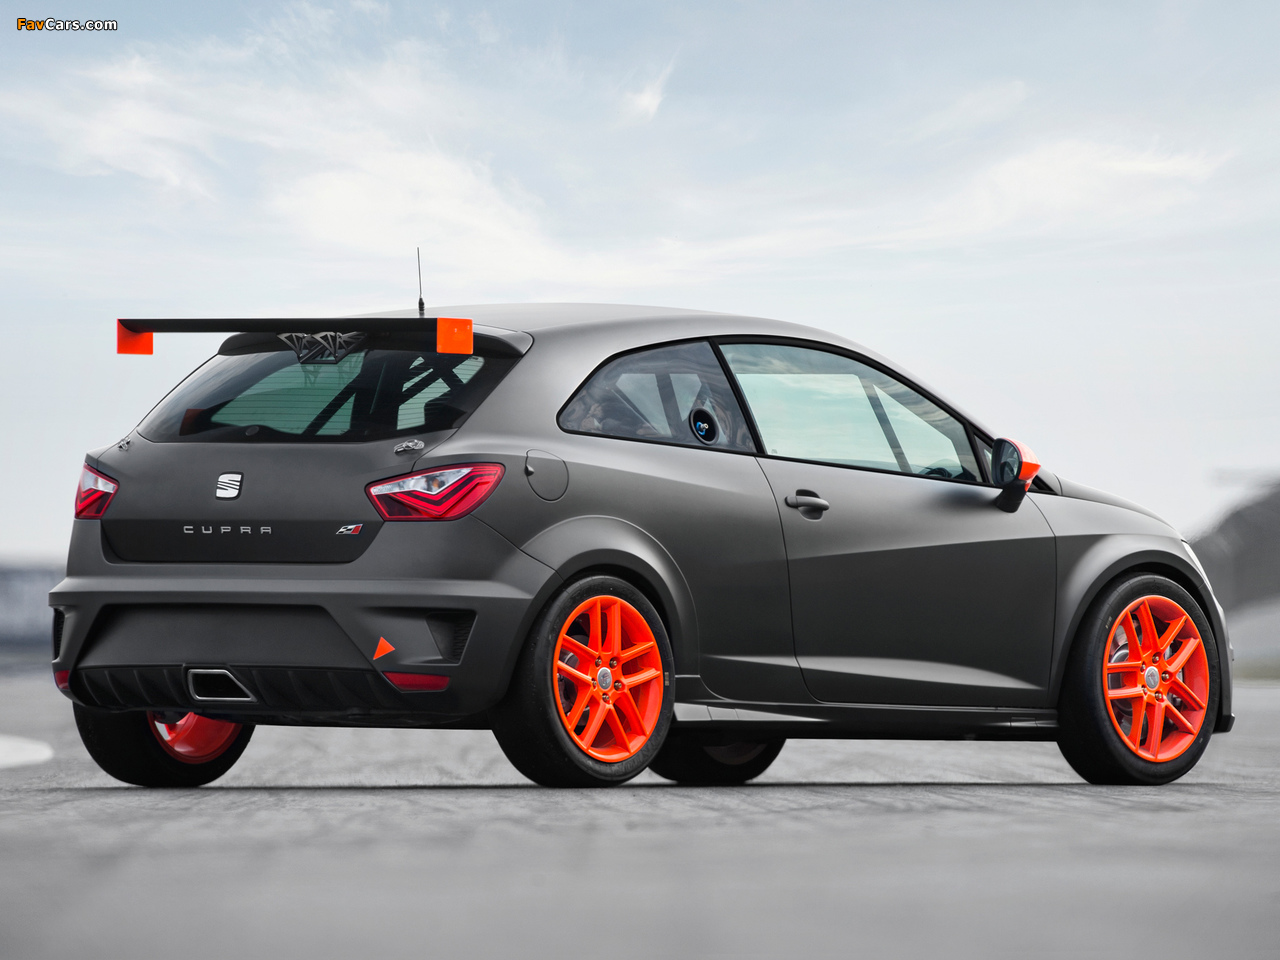 Seat Ibiza SC Trophy 2012 pictures (1280 x 960)